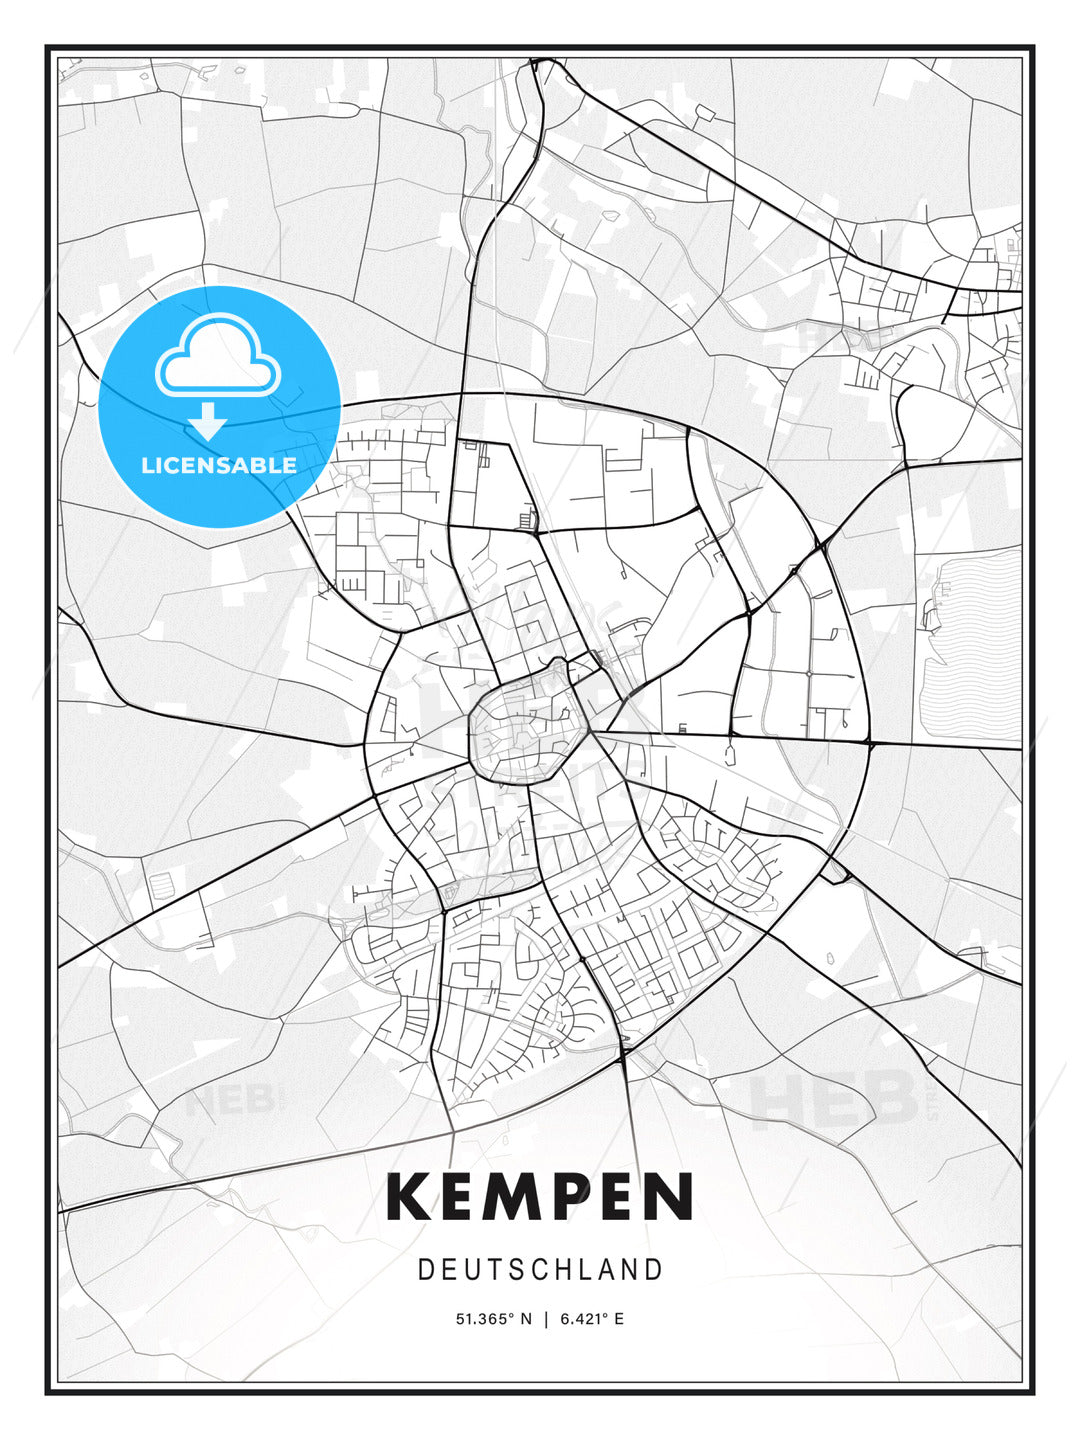 Kempen, Germany, Modern Print Template in Various Formats - HEBSTREITS Sketches